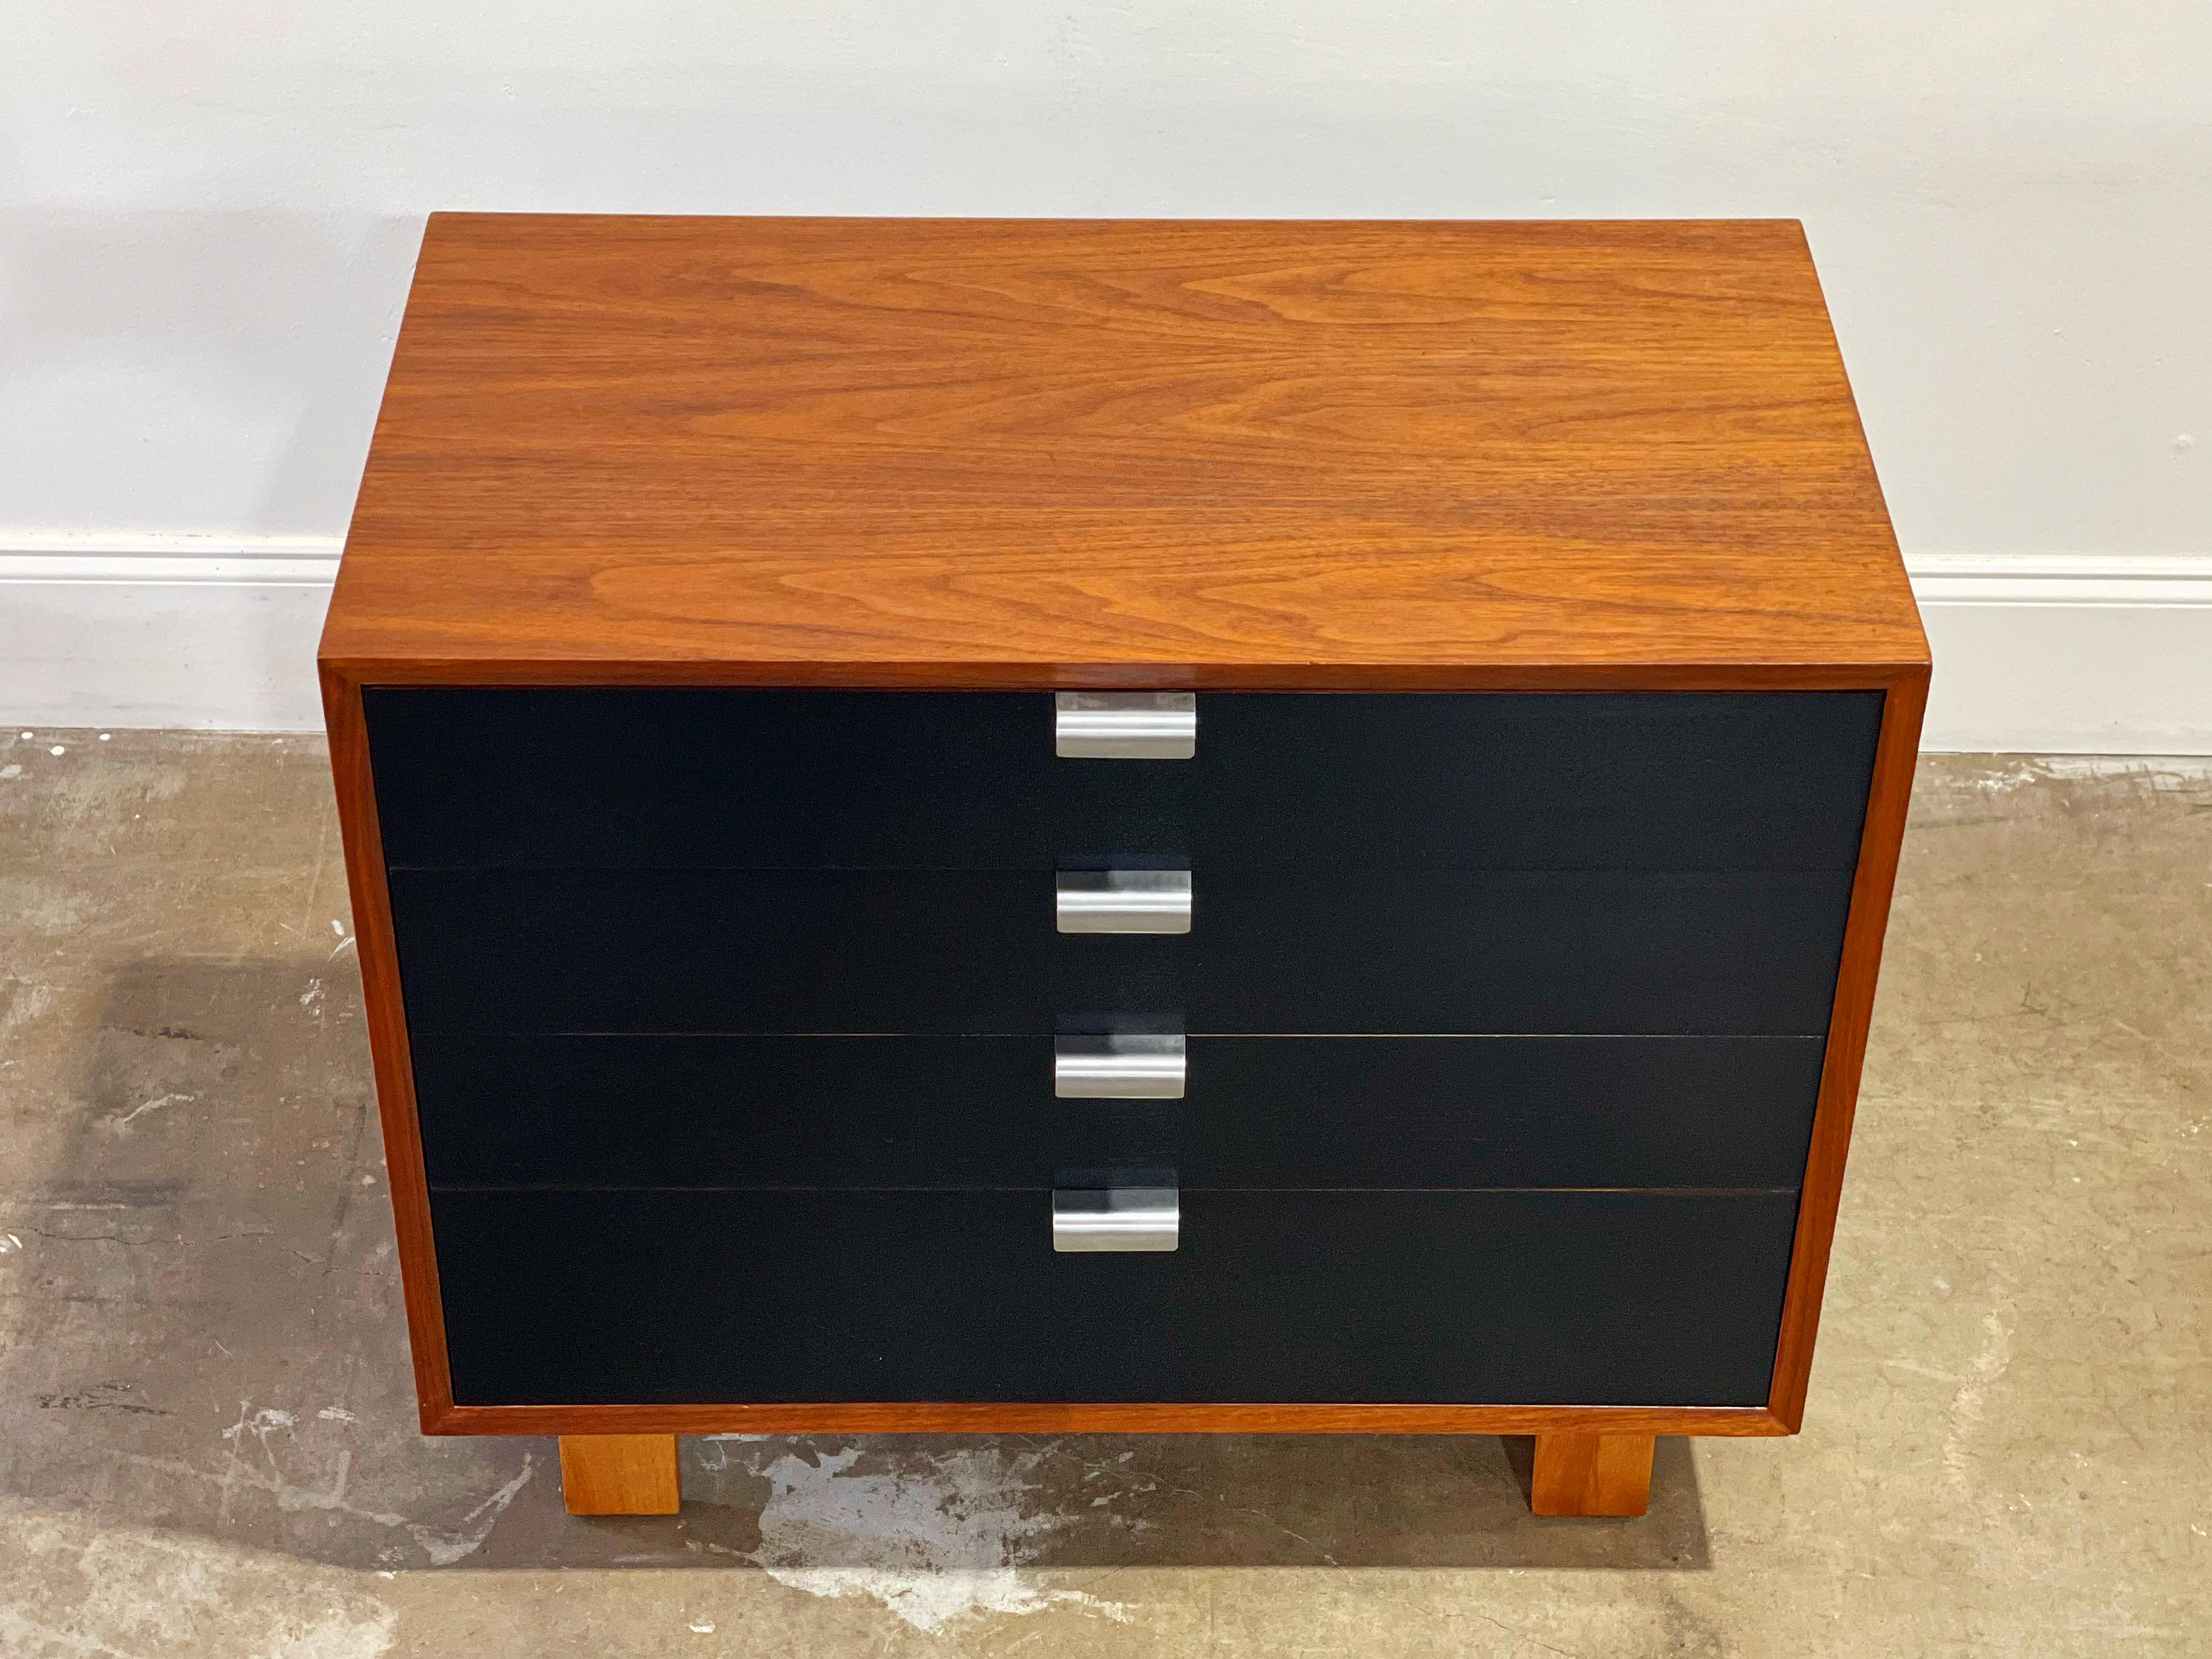 George Nelson for Herman Miller midcentury modern four drawer dresser chest, circa 1950s. Part of the Basic Cabinet series with Walnut wood case, ebonized black lacquered drawers, aluminum pulls and sculpted Primavera wood base legs.
Fully restored